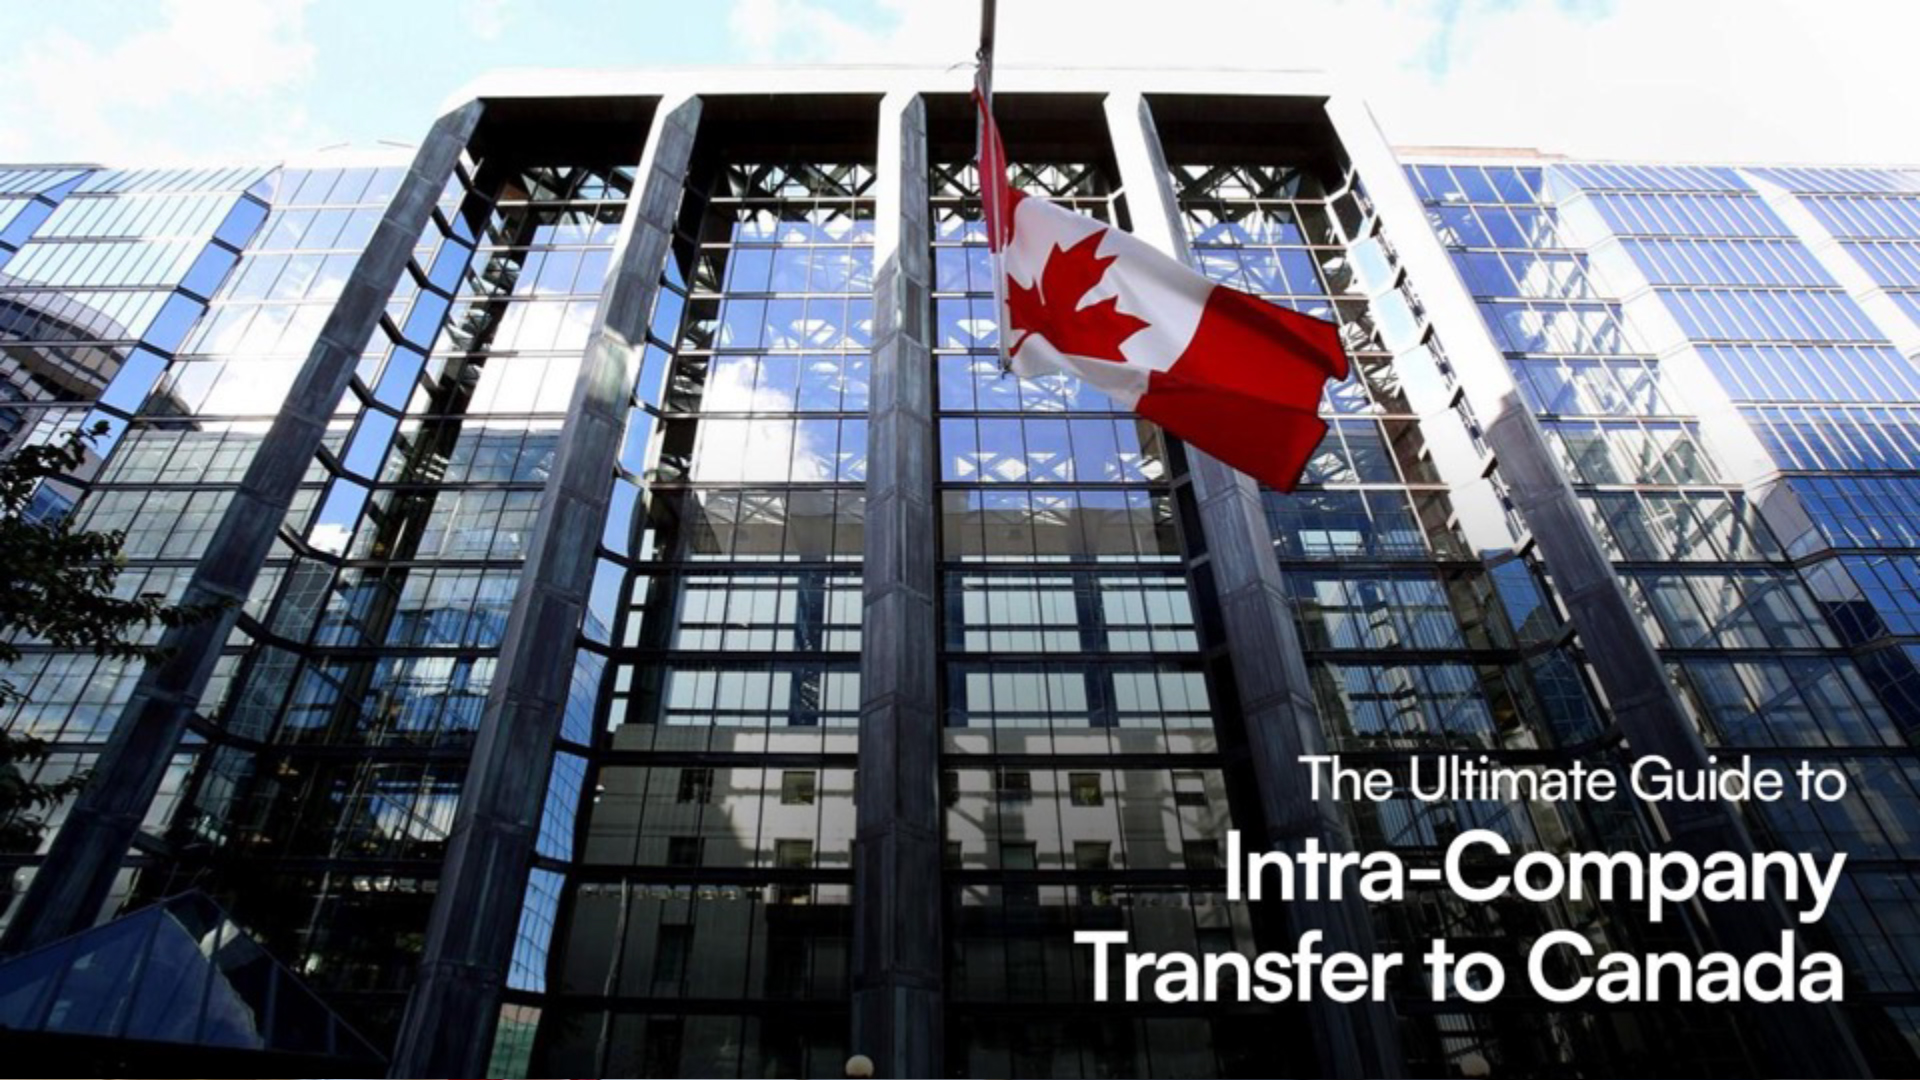 The Ultimate Guide to Intra-Company Transfer to Canada